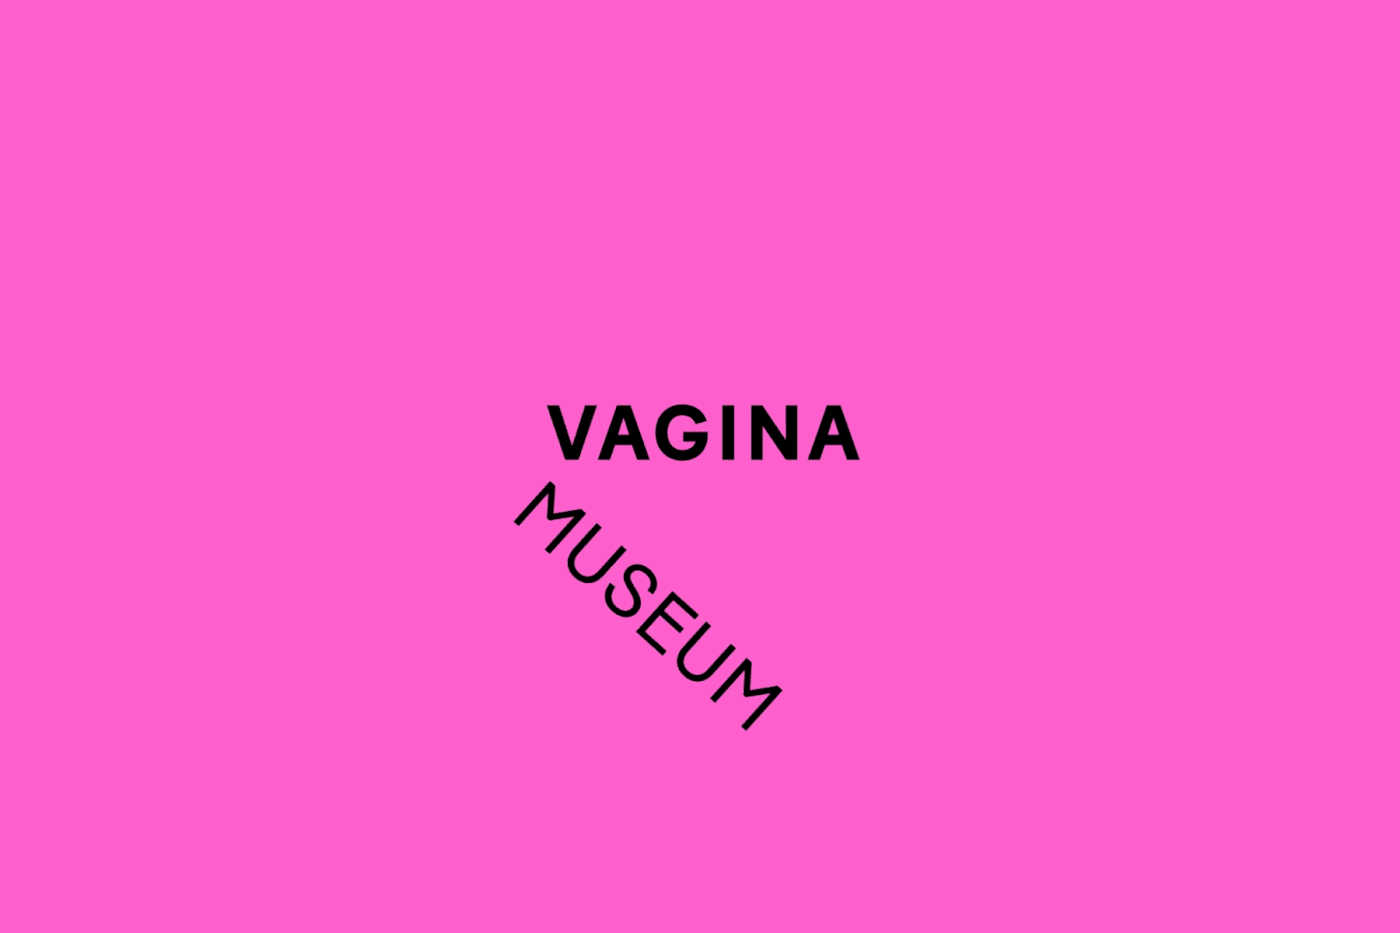 New Logo and Identity for Vagina Museum by Passport